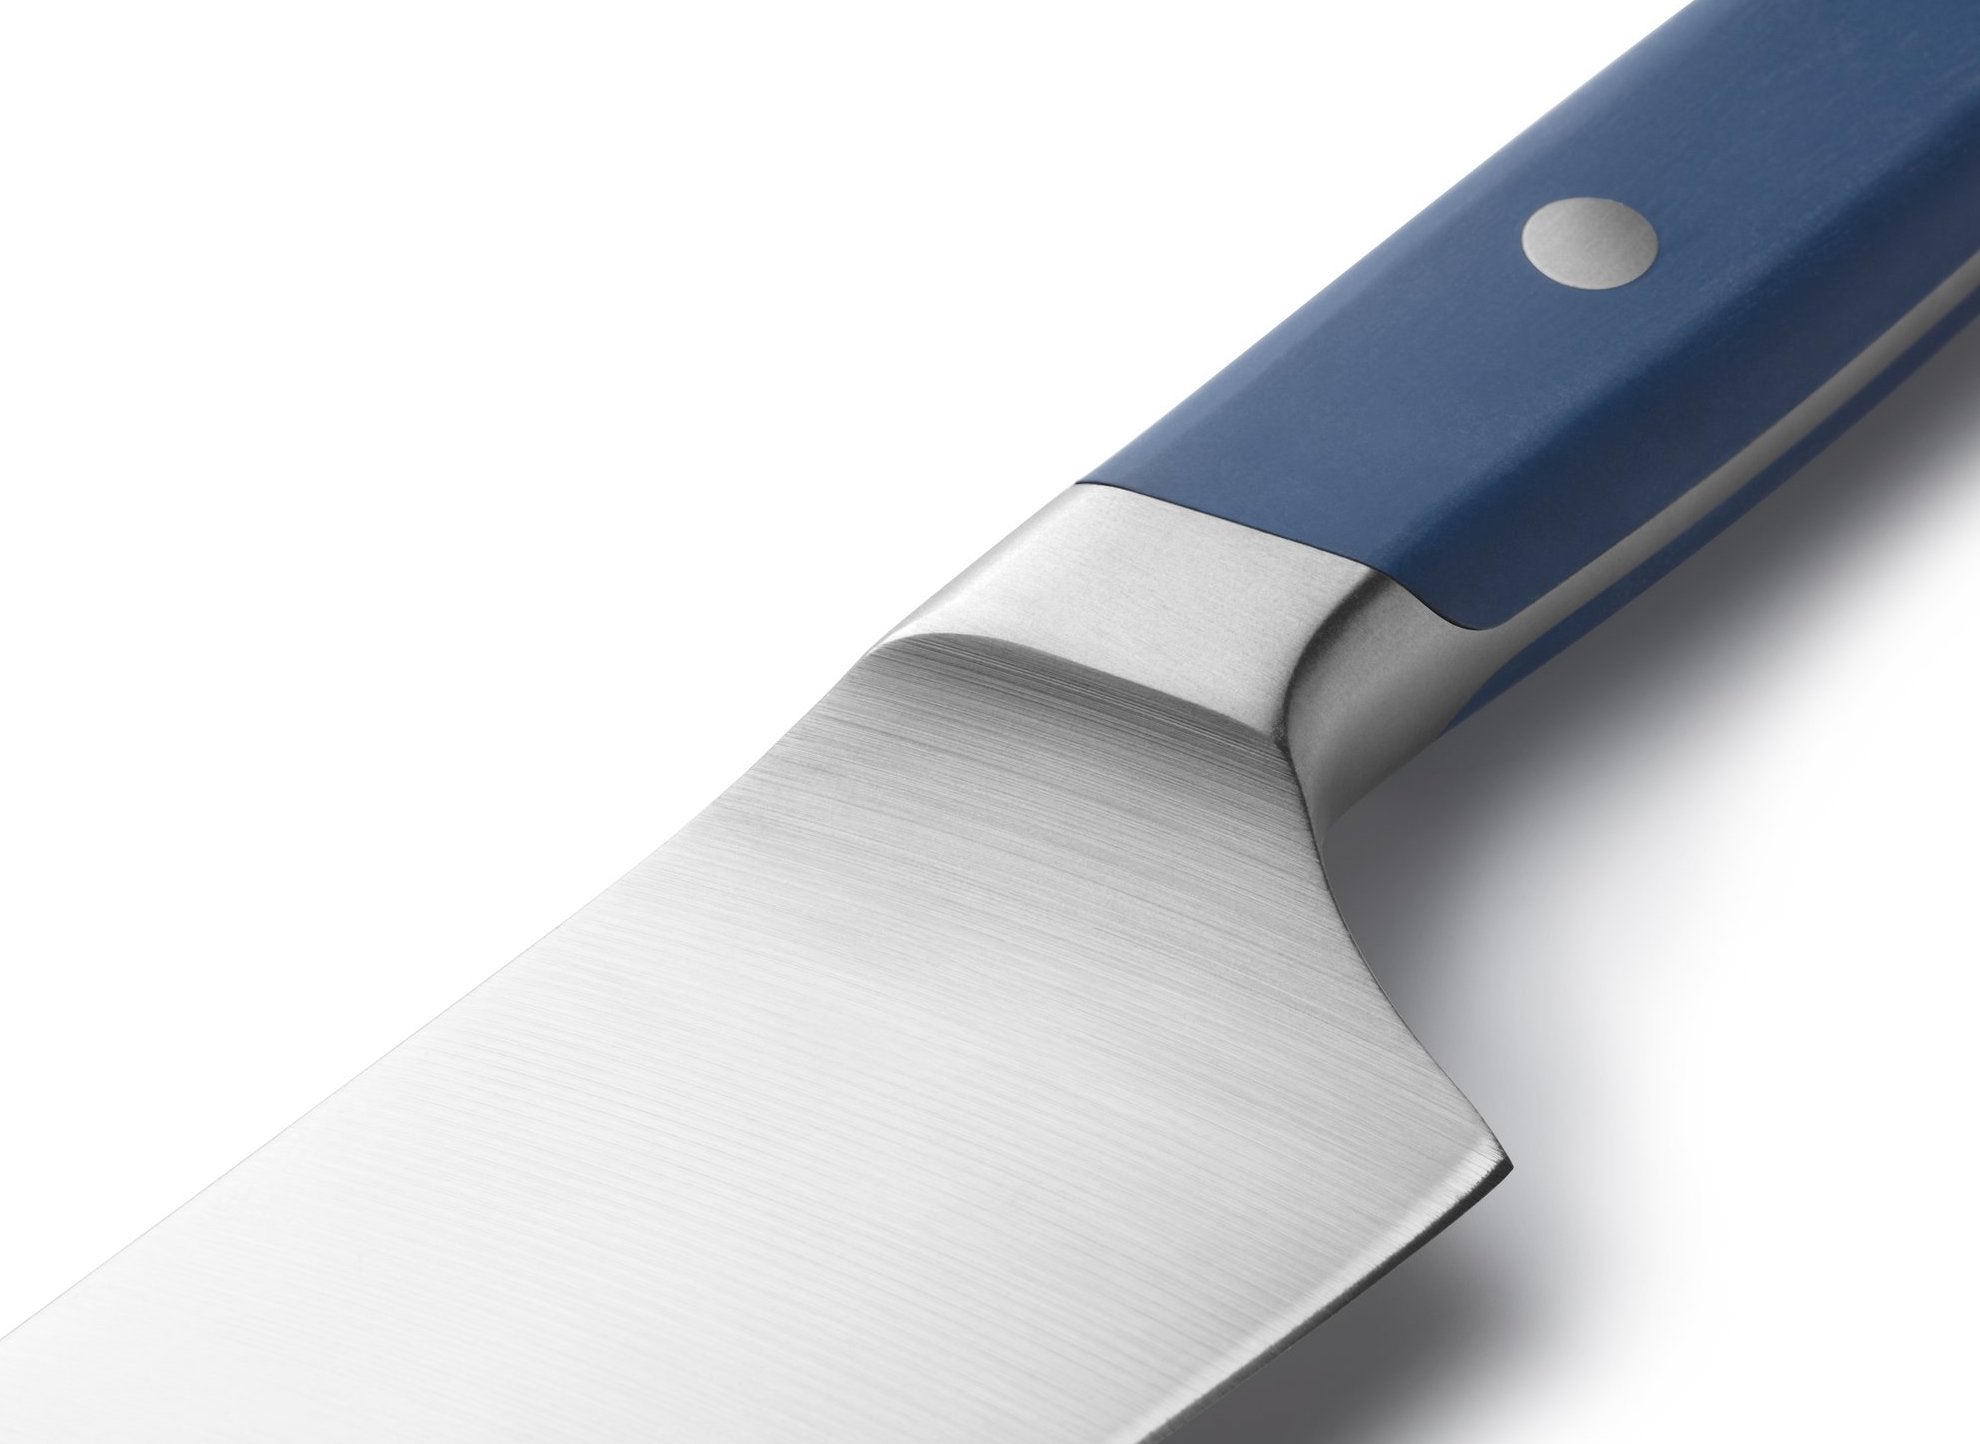 Knife handle material: the handle of the Misen Chef's Knife